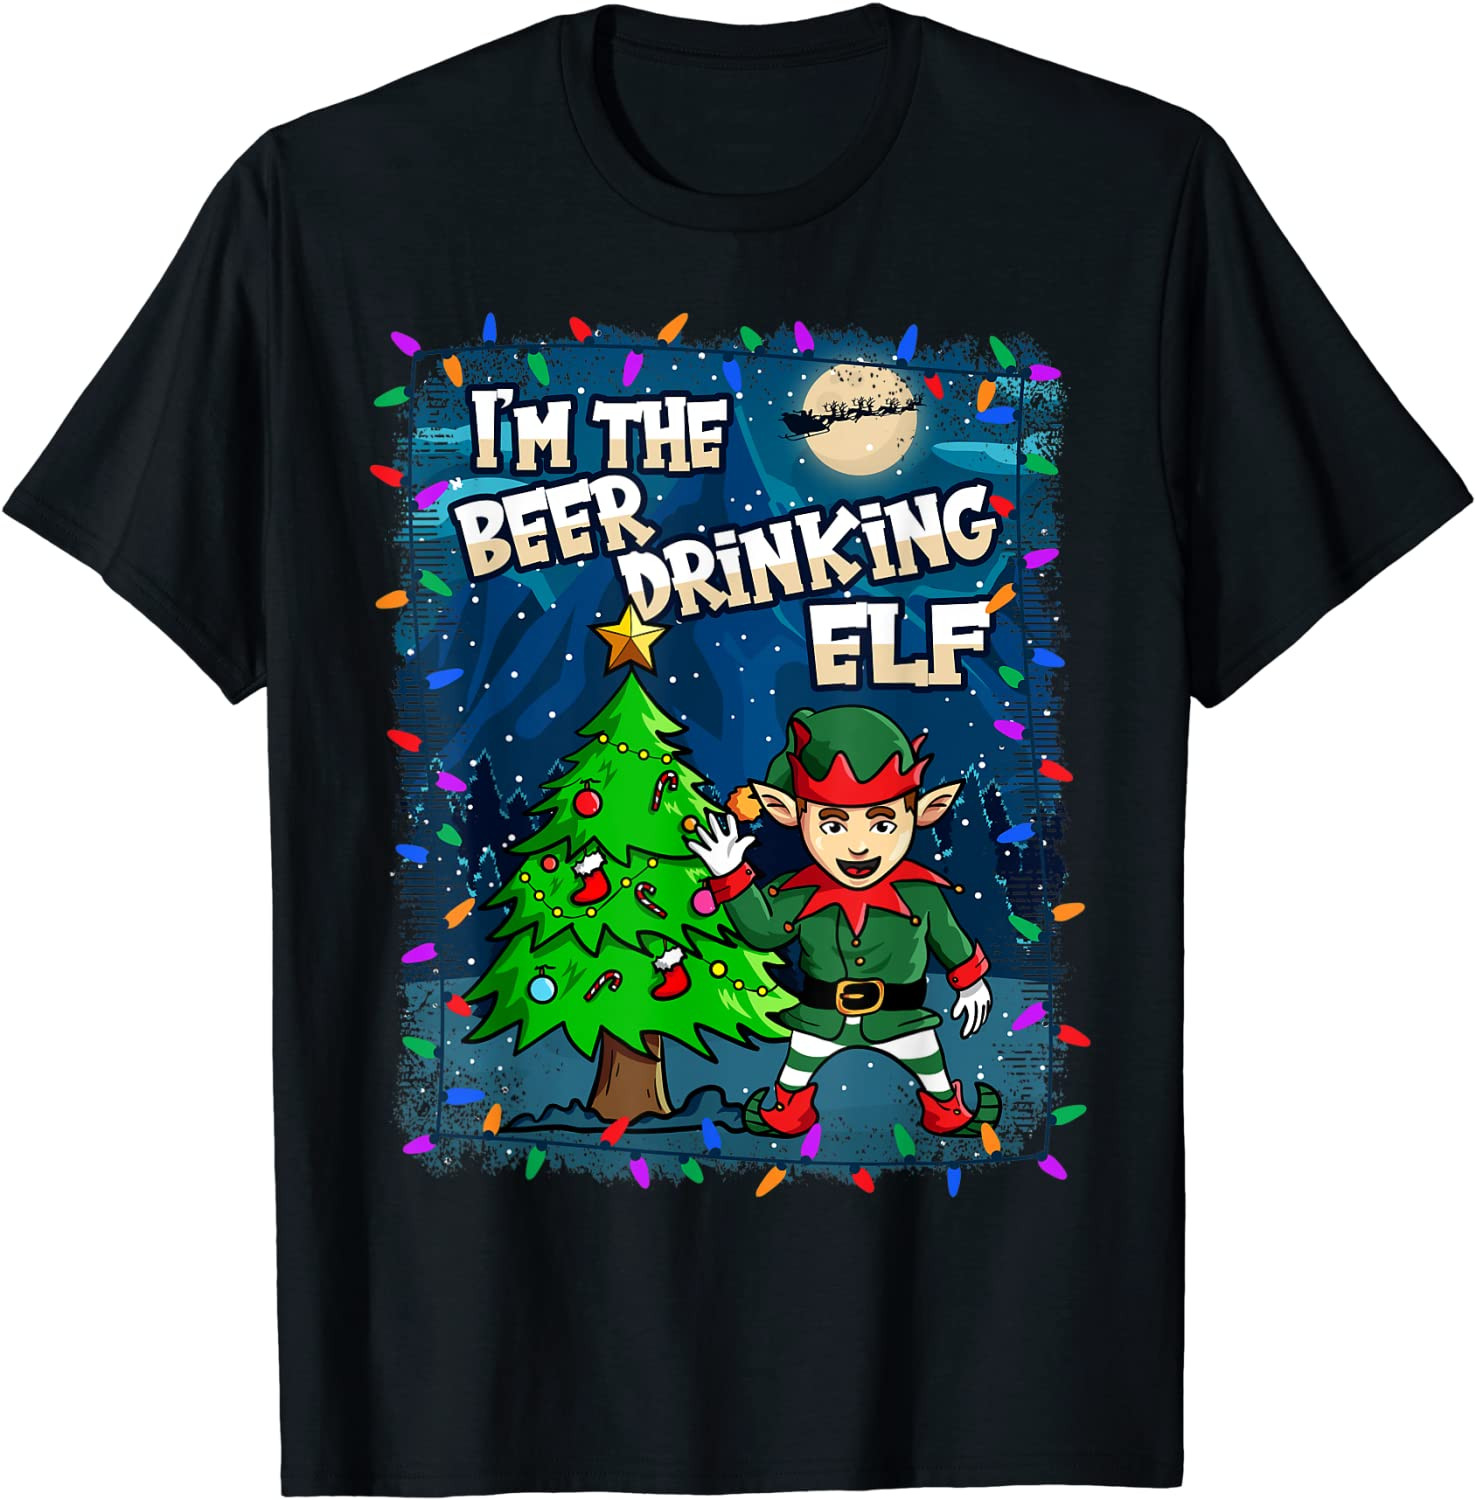 I'm The Beer Drinking Elf Christmas Santa Claus MALE ELF T-Shirt